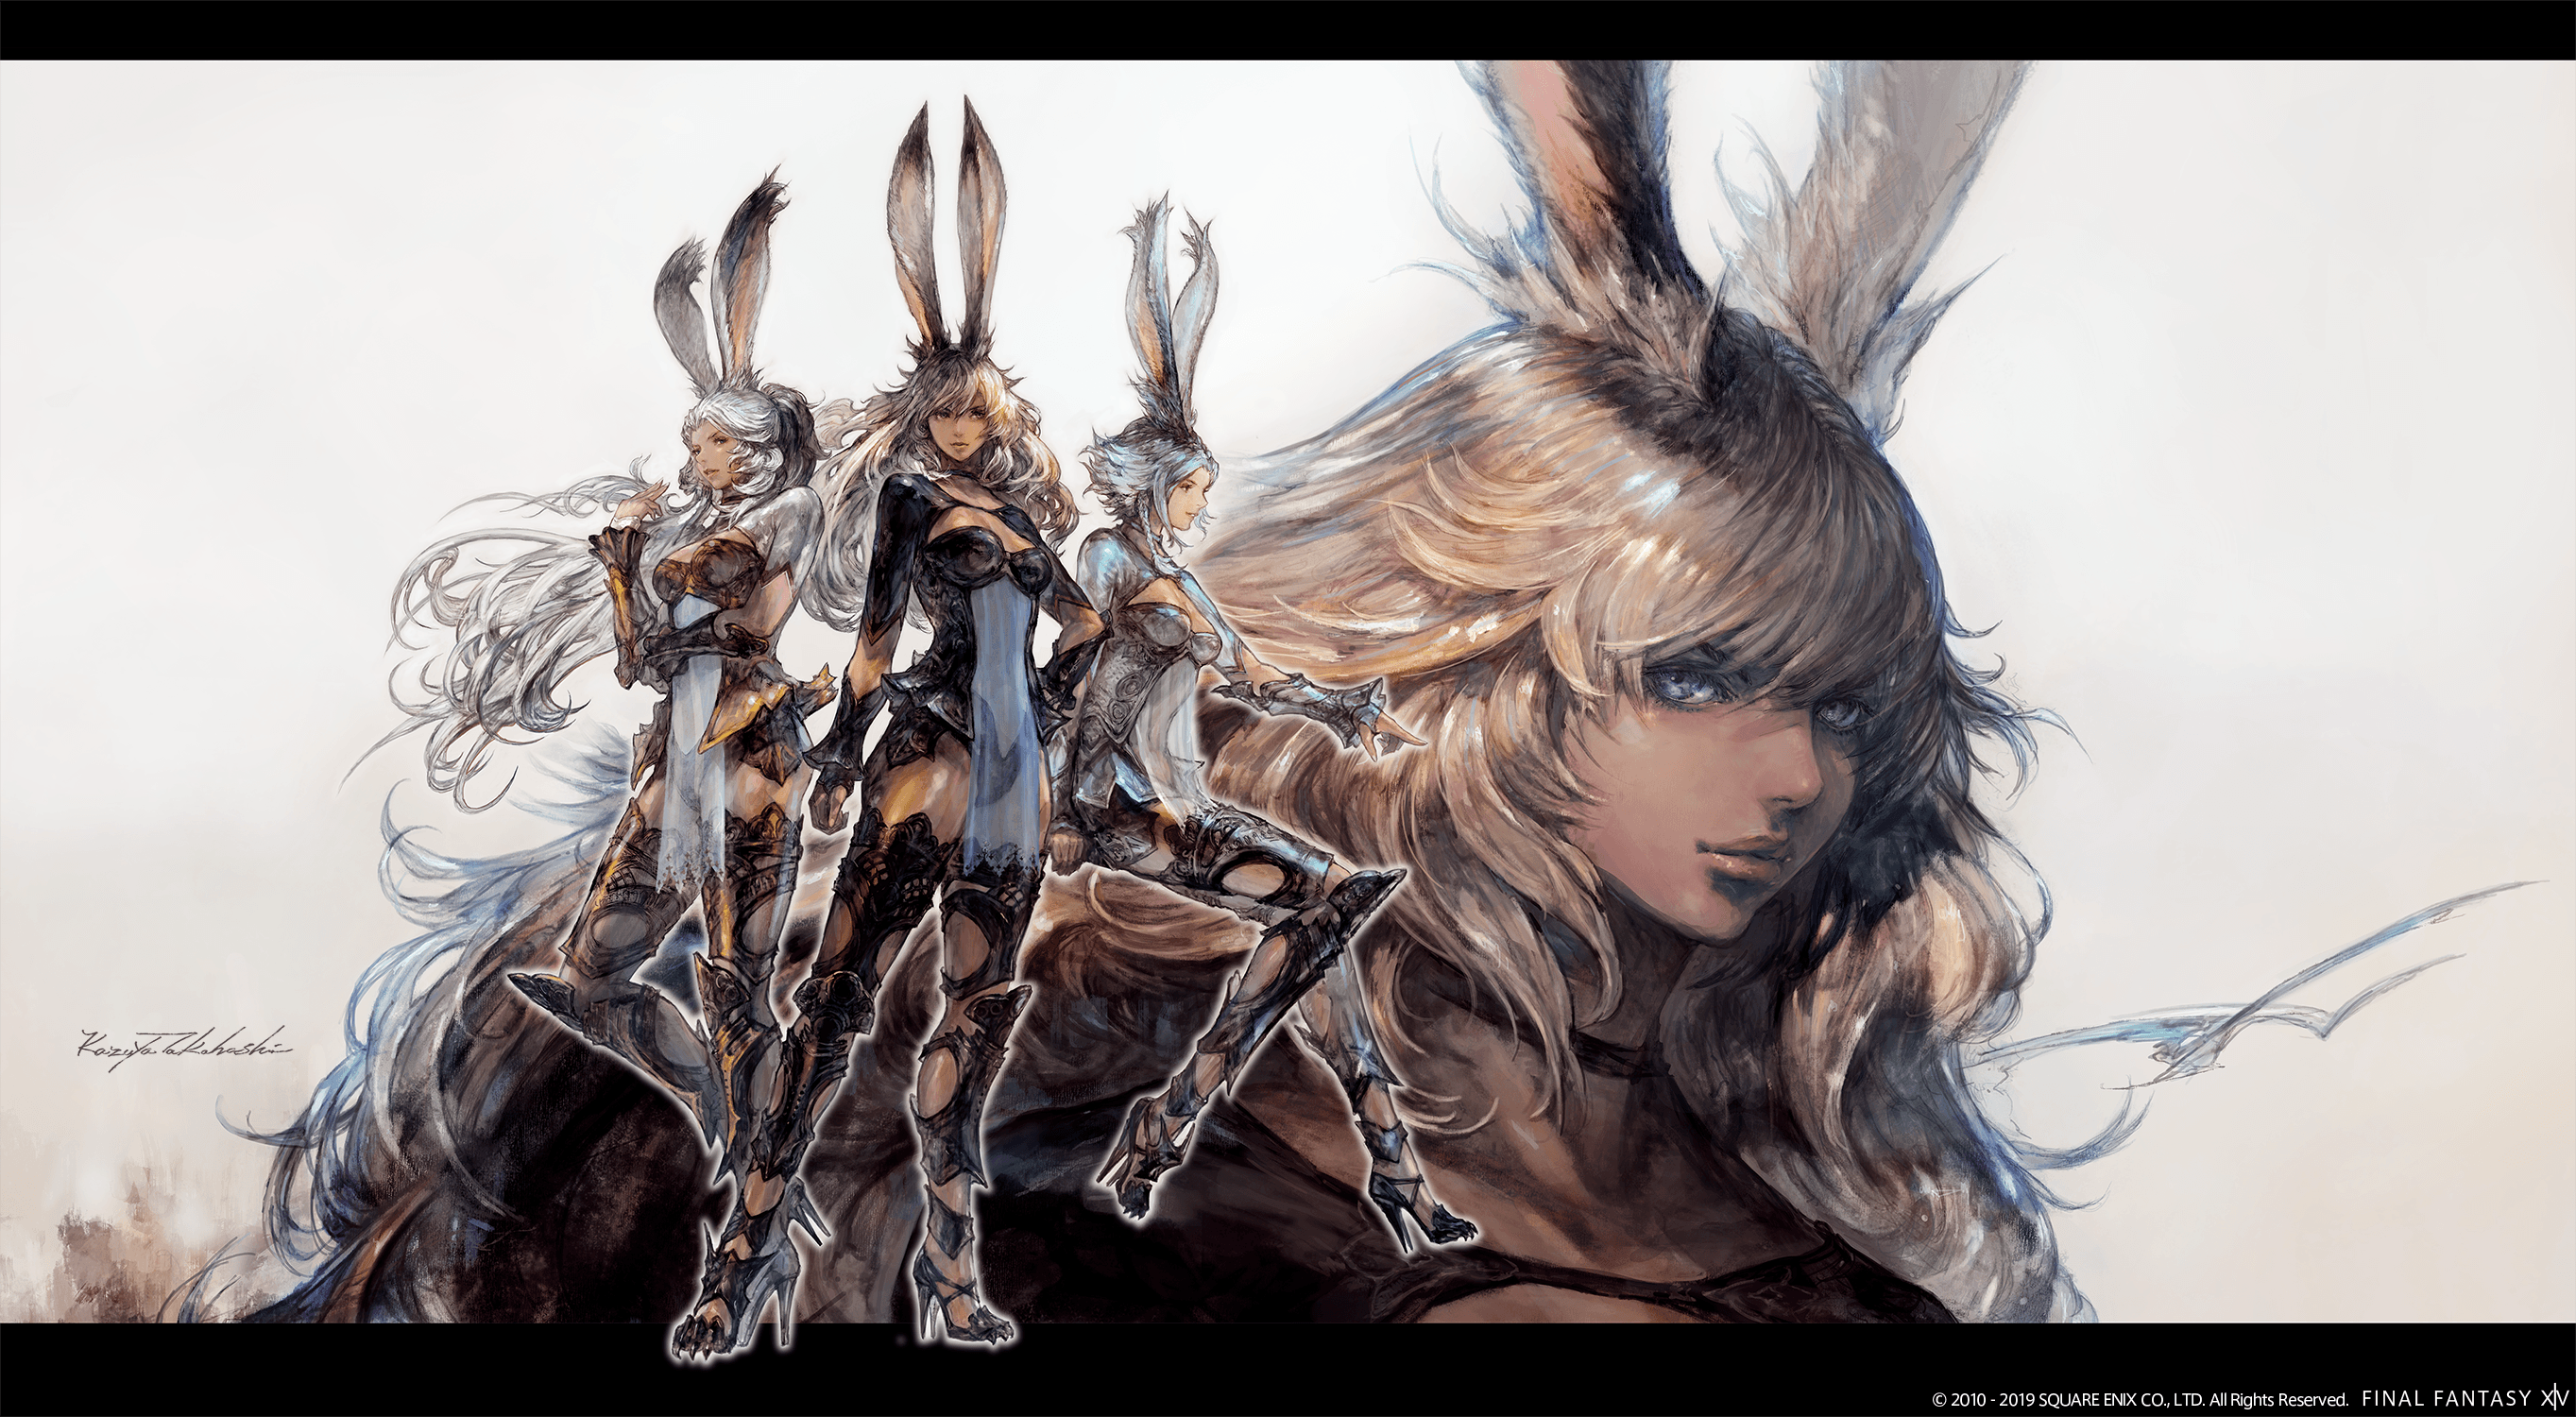 Final Fantasy XIV FanFest shows off new job, playable race